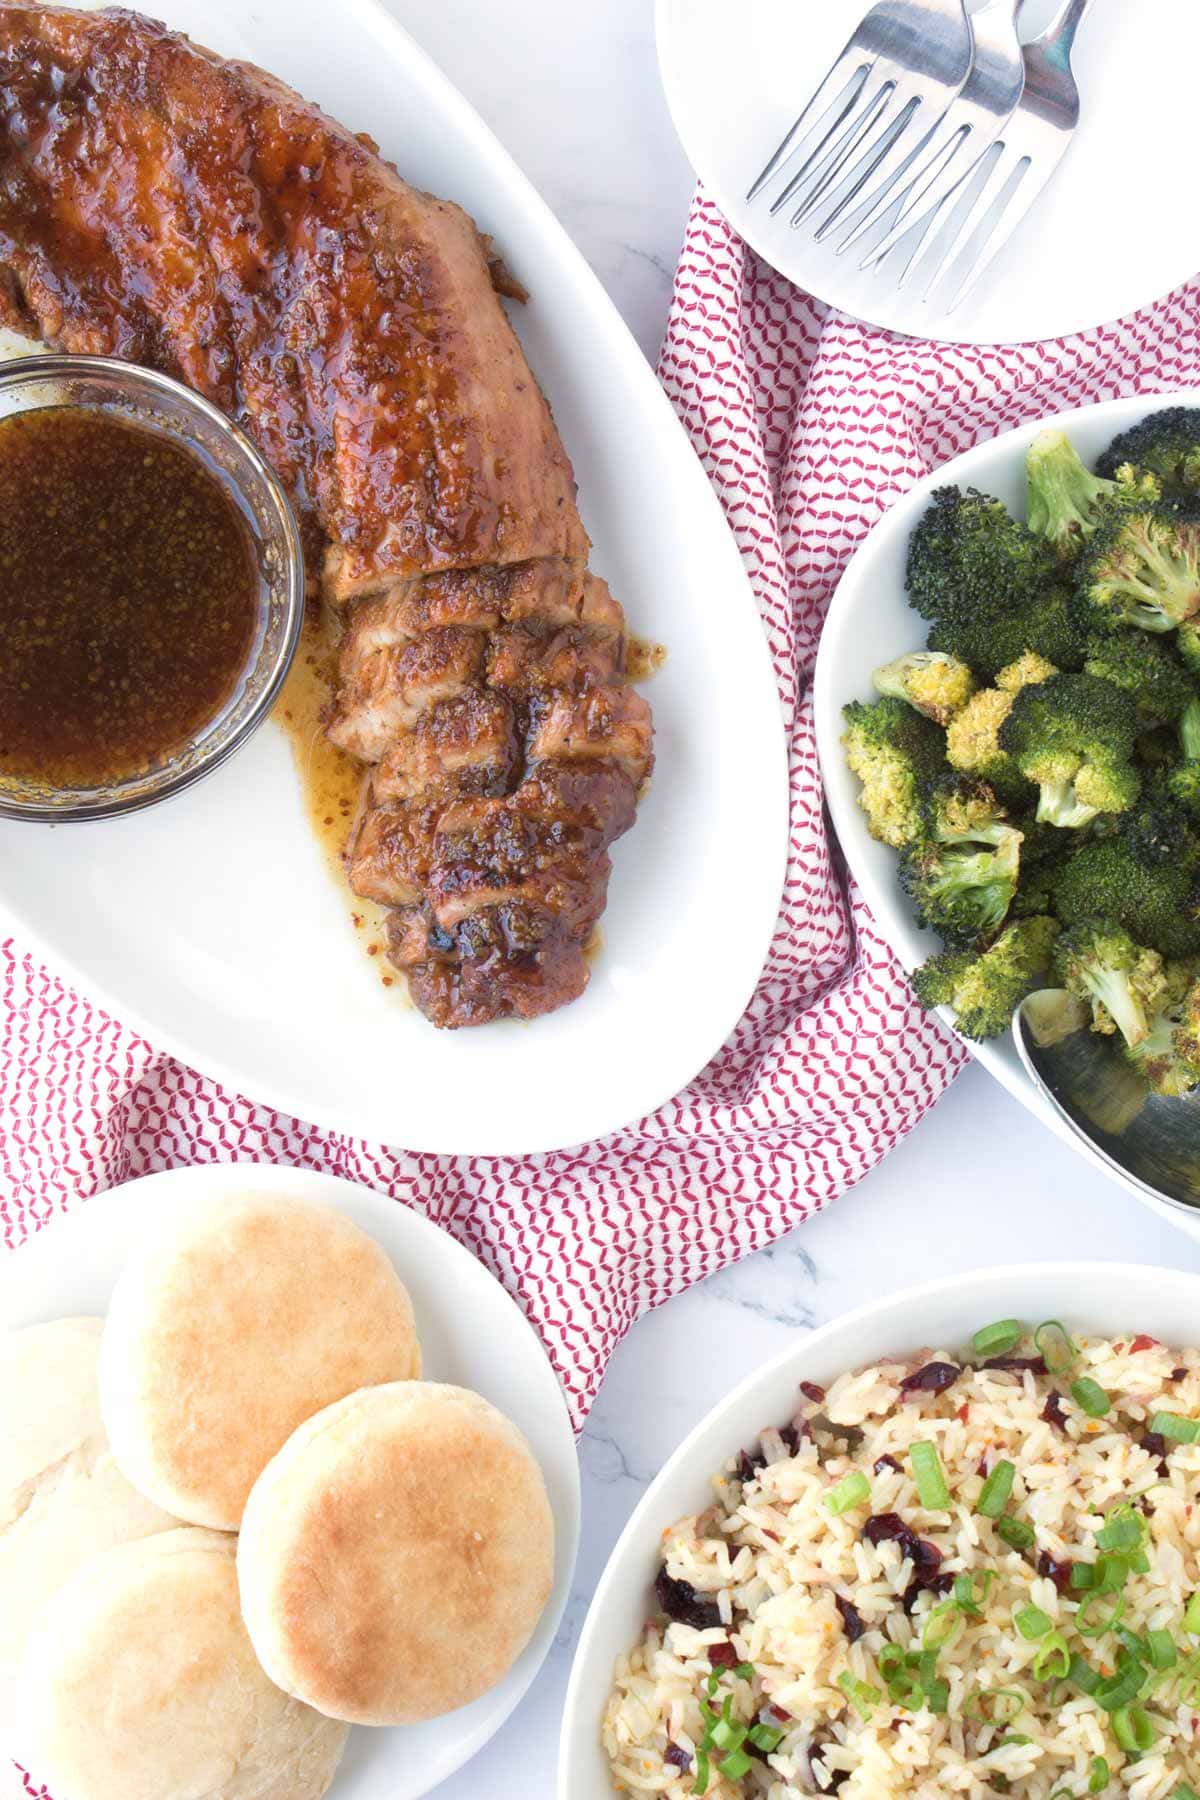 Table with pork tenderloin, biscuits, broccoli and rice.